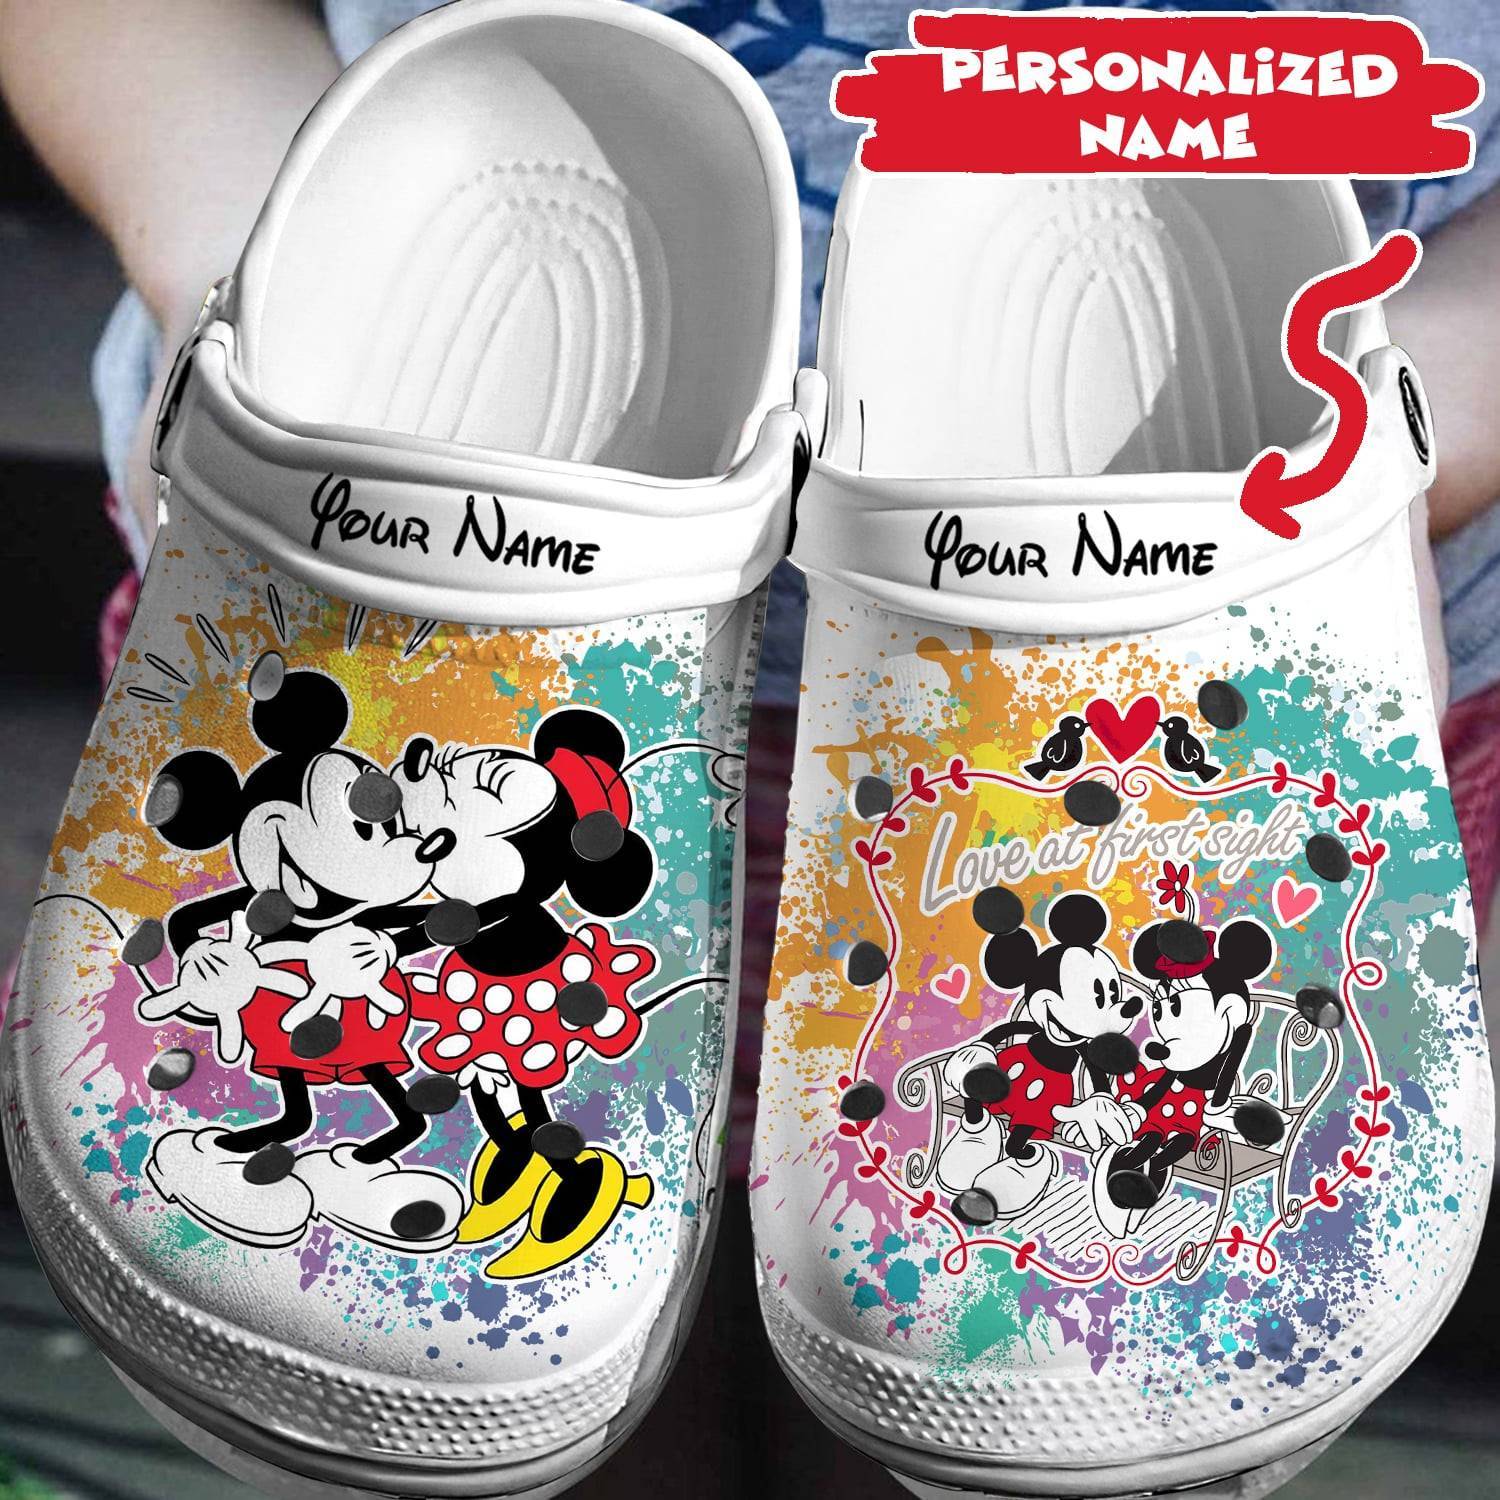 Design Your Disney Dreams: Personalized Mickey Minnie Crocs 3D Clog Shoes